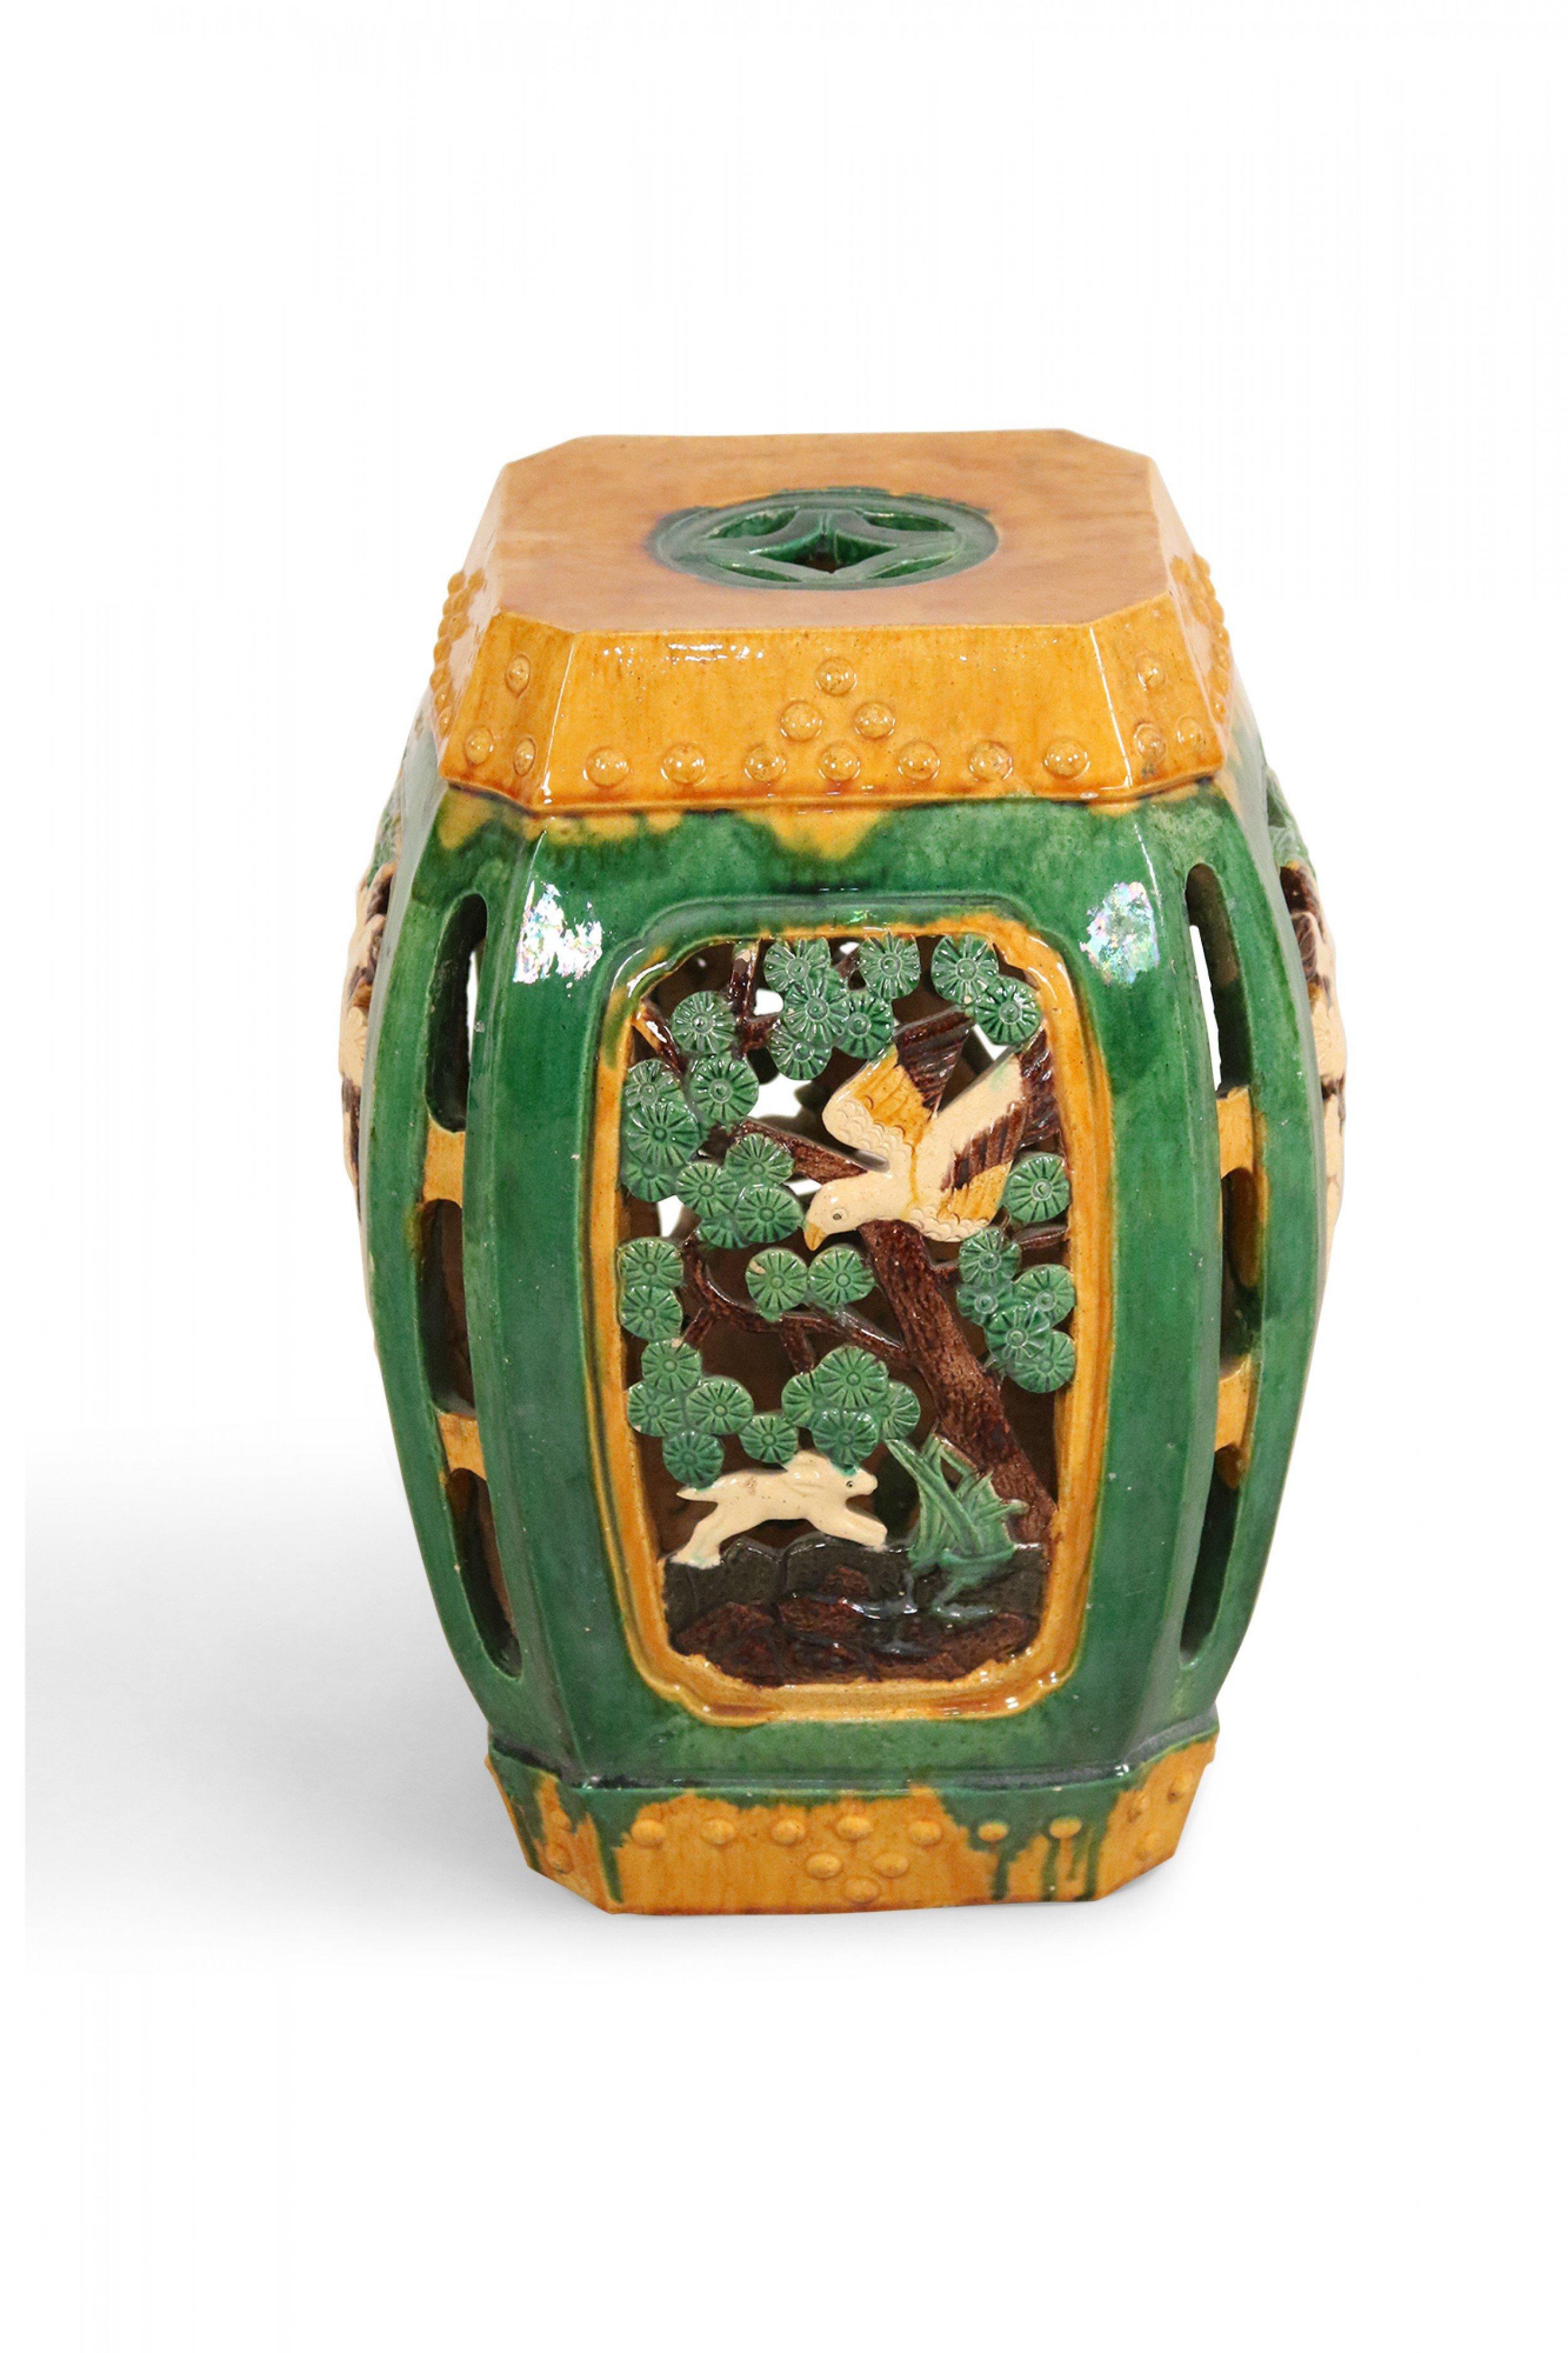 Chinoiserie Late 19th Century Chinese Yellow and Green Decorative Ceramic Garden Seat